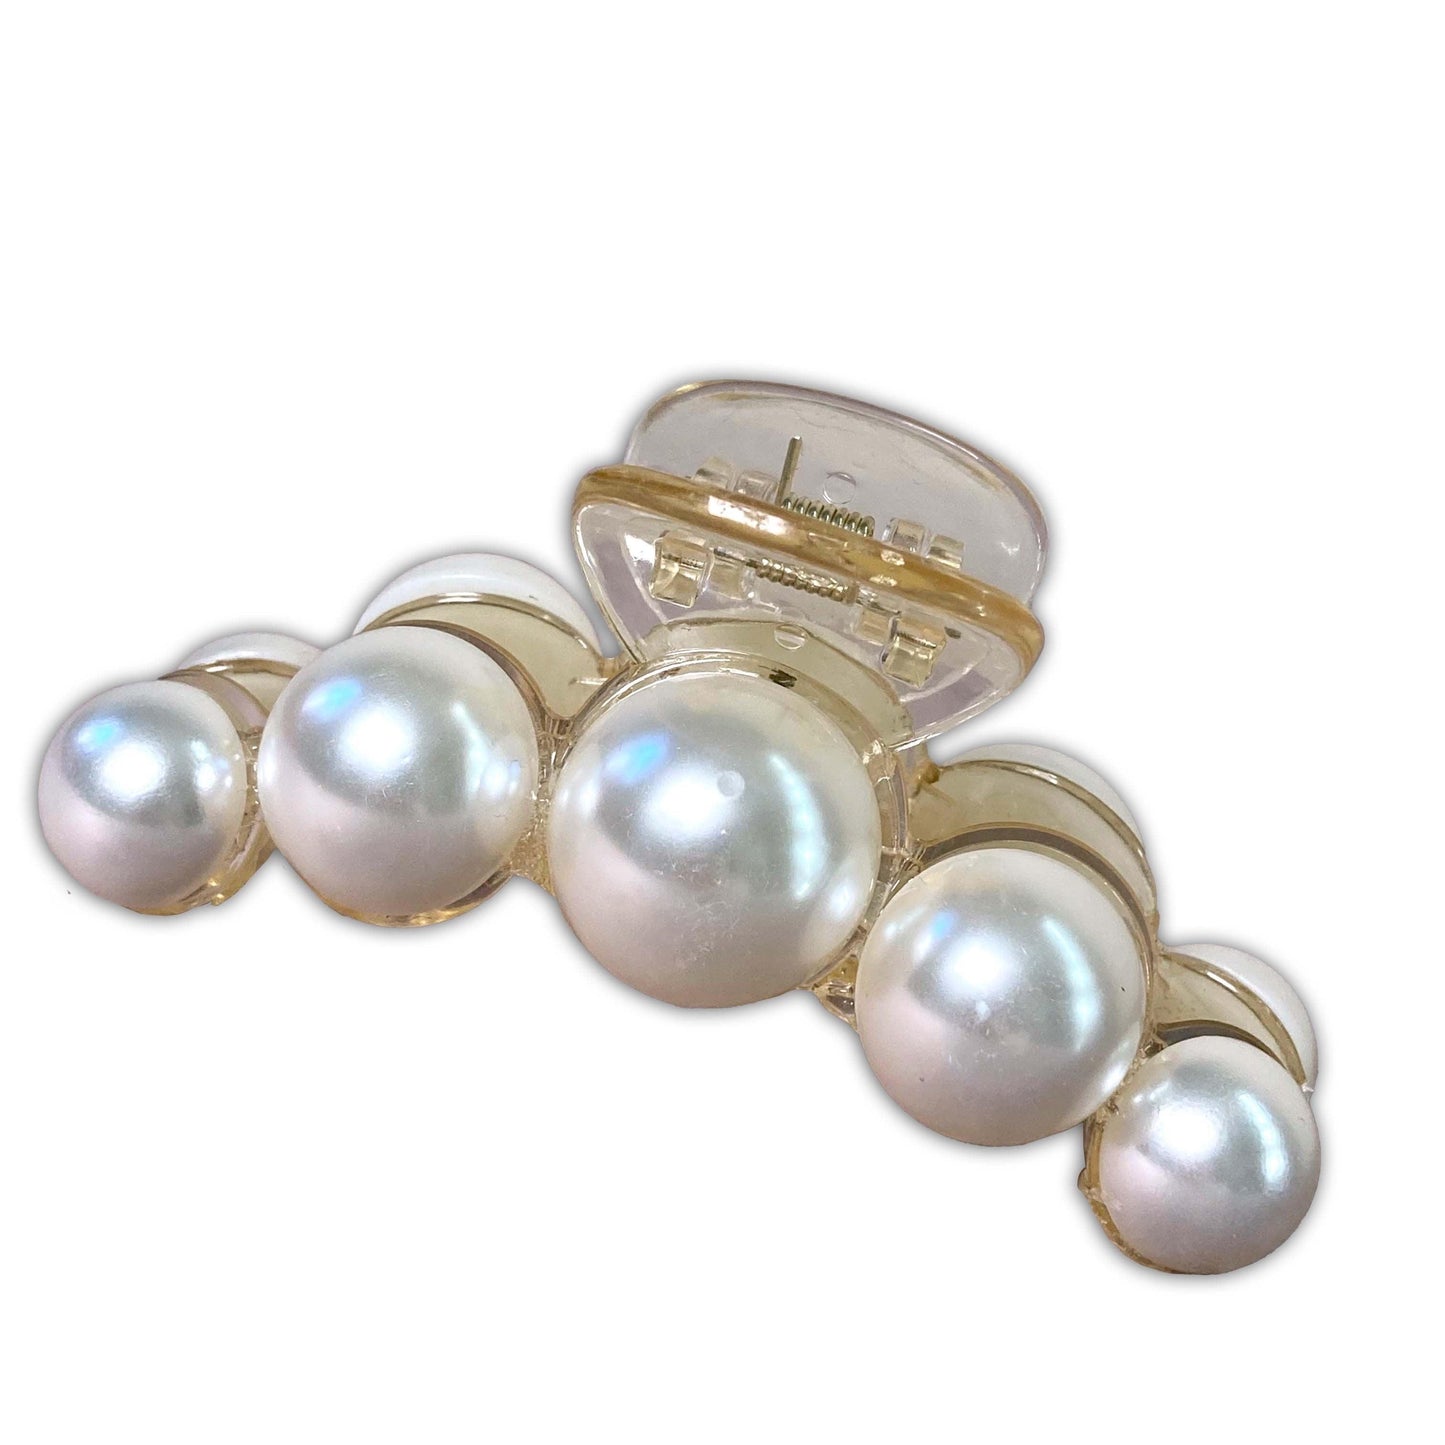 Luxury pearl hair clip front view with shiny pearls